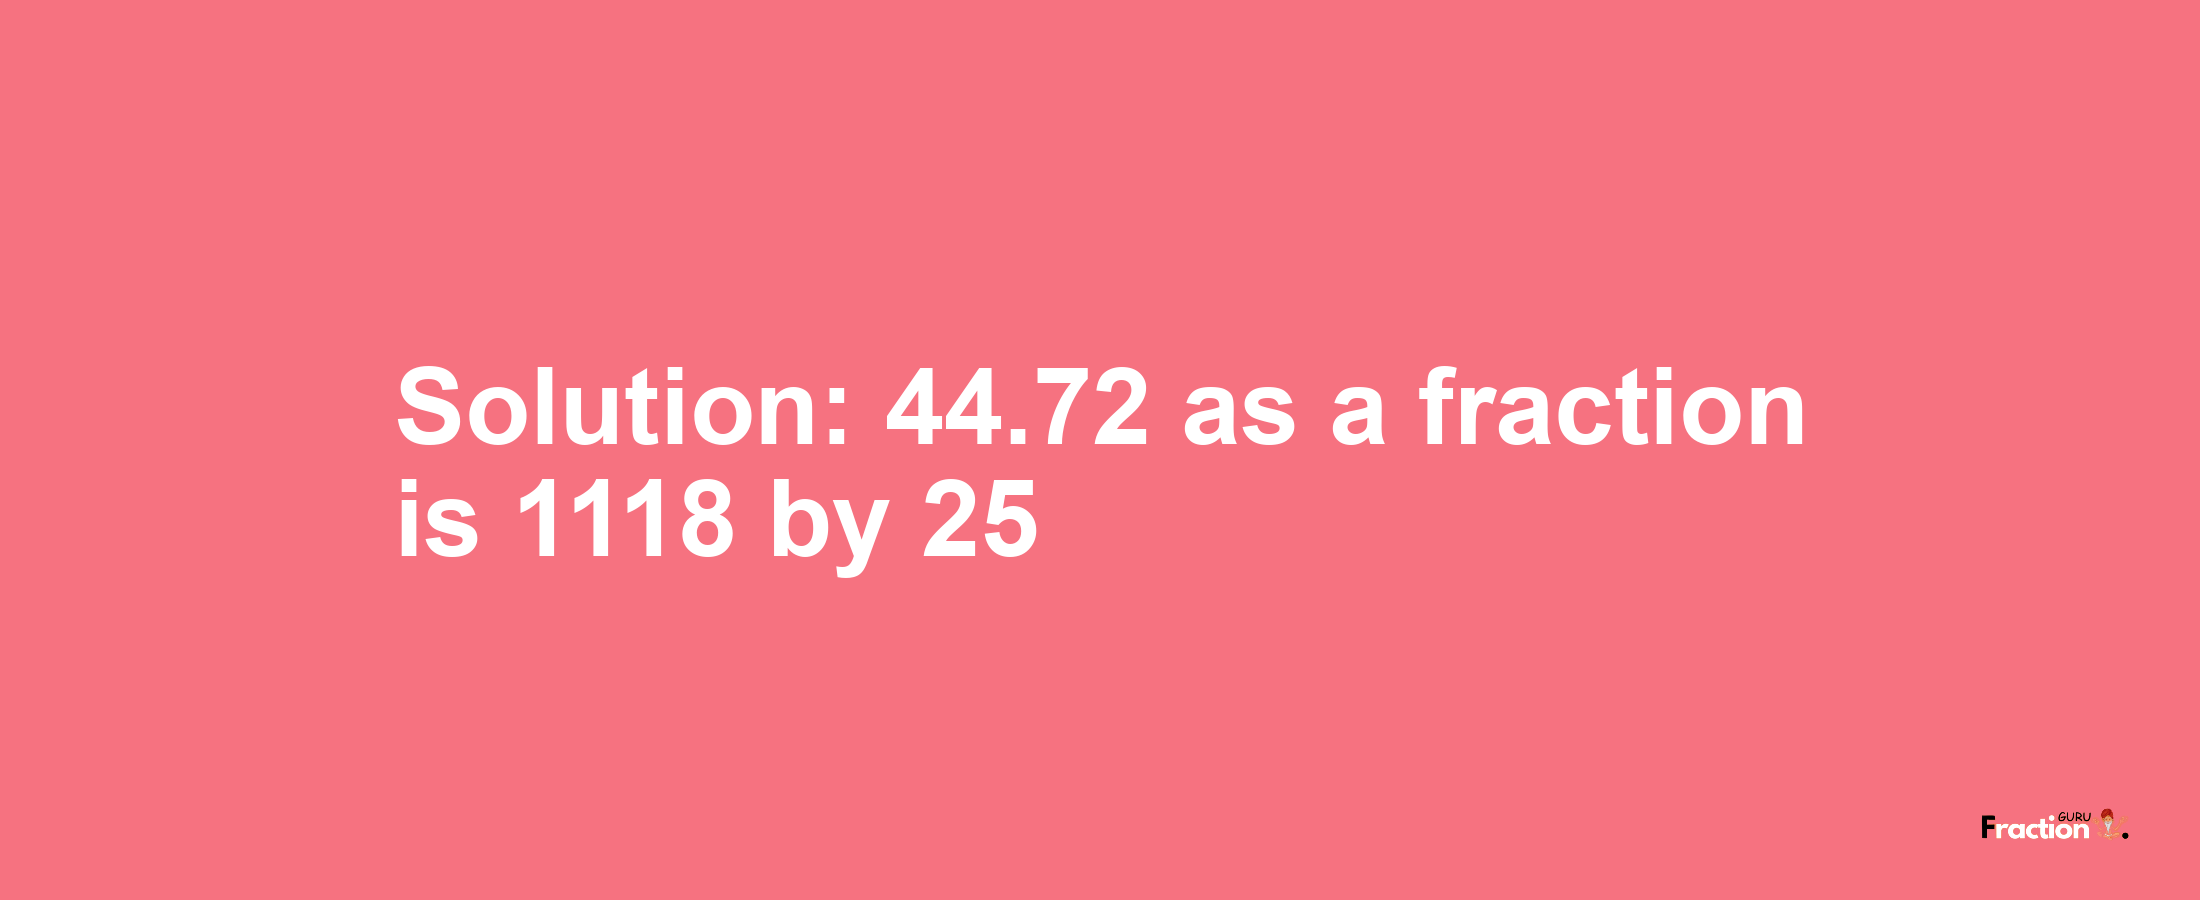 Solution:44.72 as a fraction is 1118/25